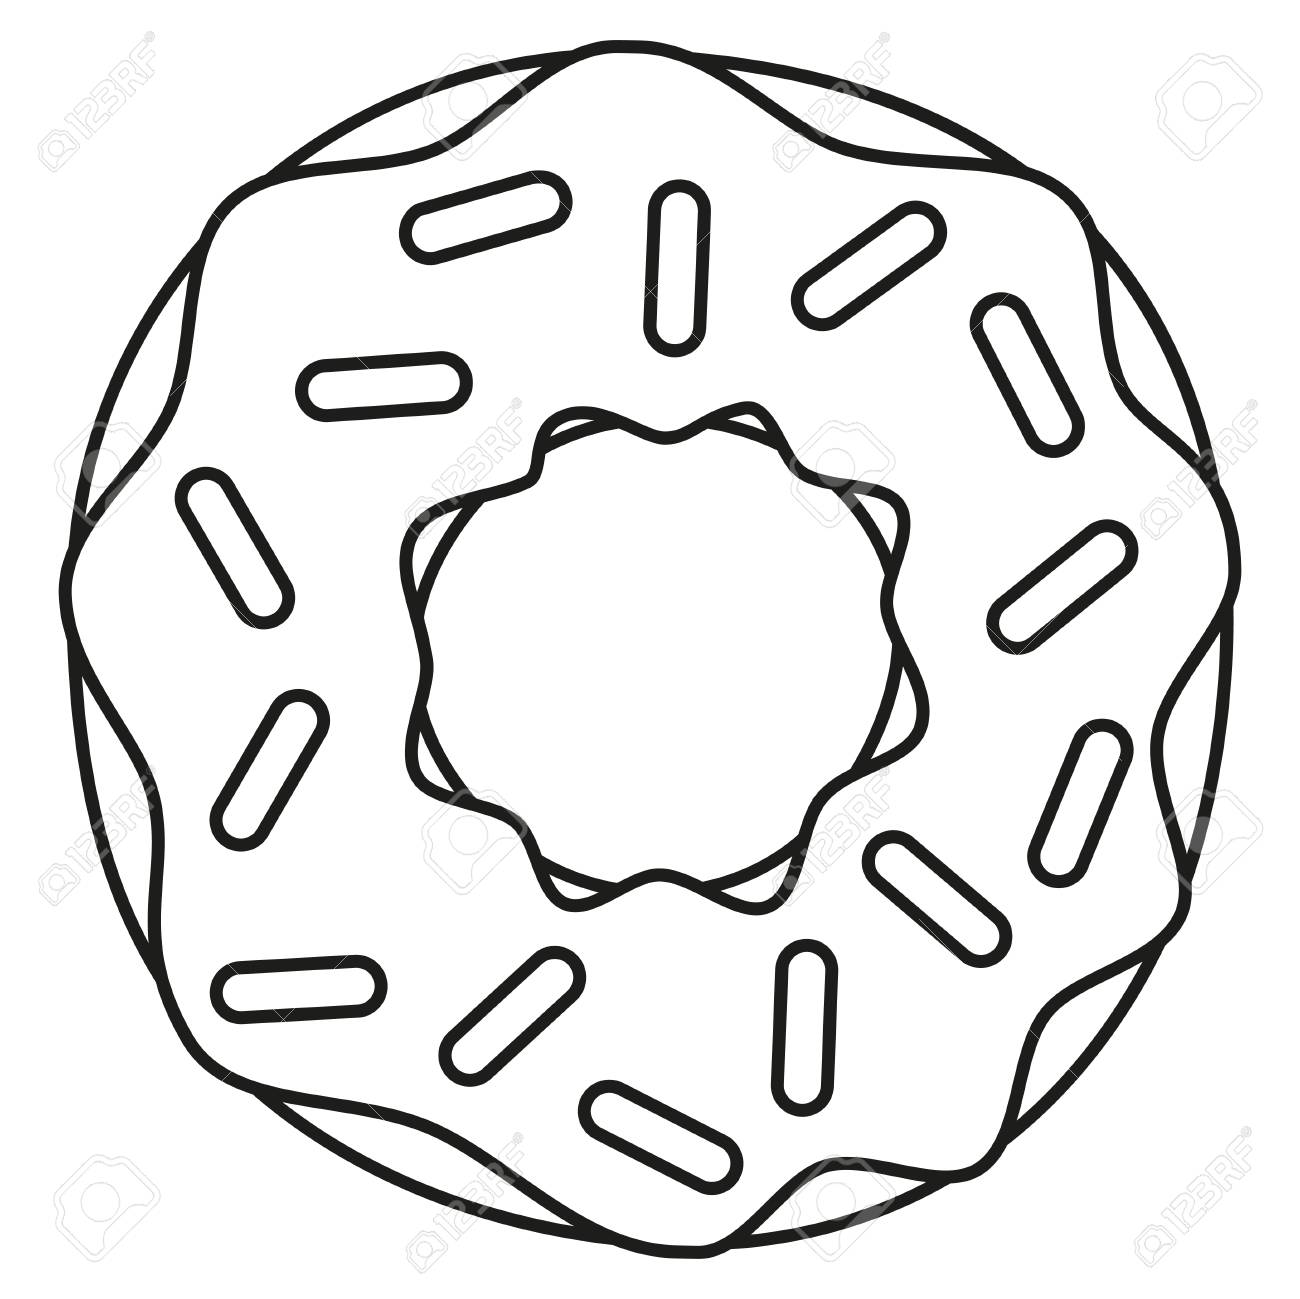 Line art black and white donut coloring page for adults and kids sweet food vector illustration for icon sticker sign patch certificate badge gift card label poster banner flayer invitation royalty free